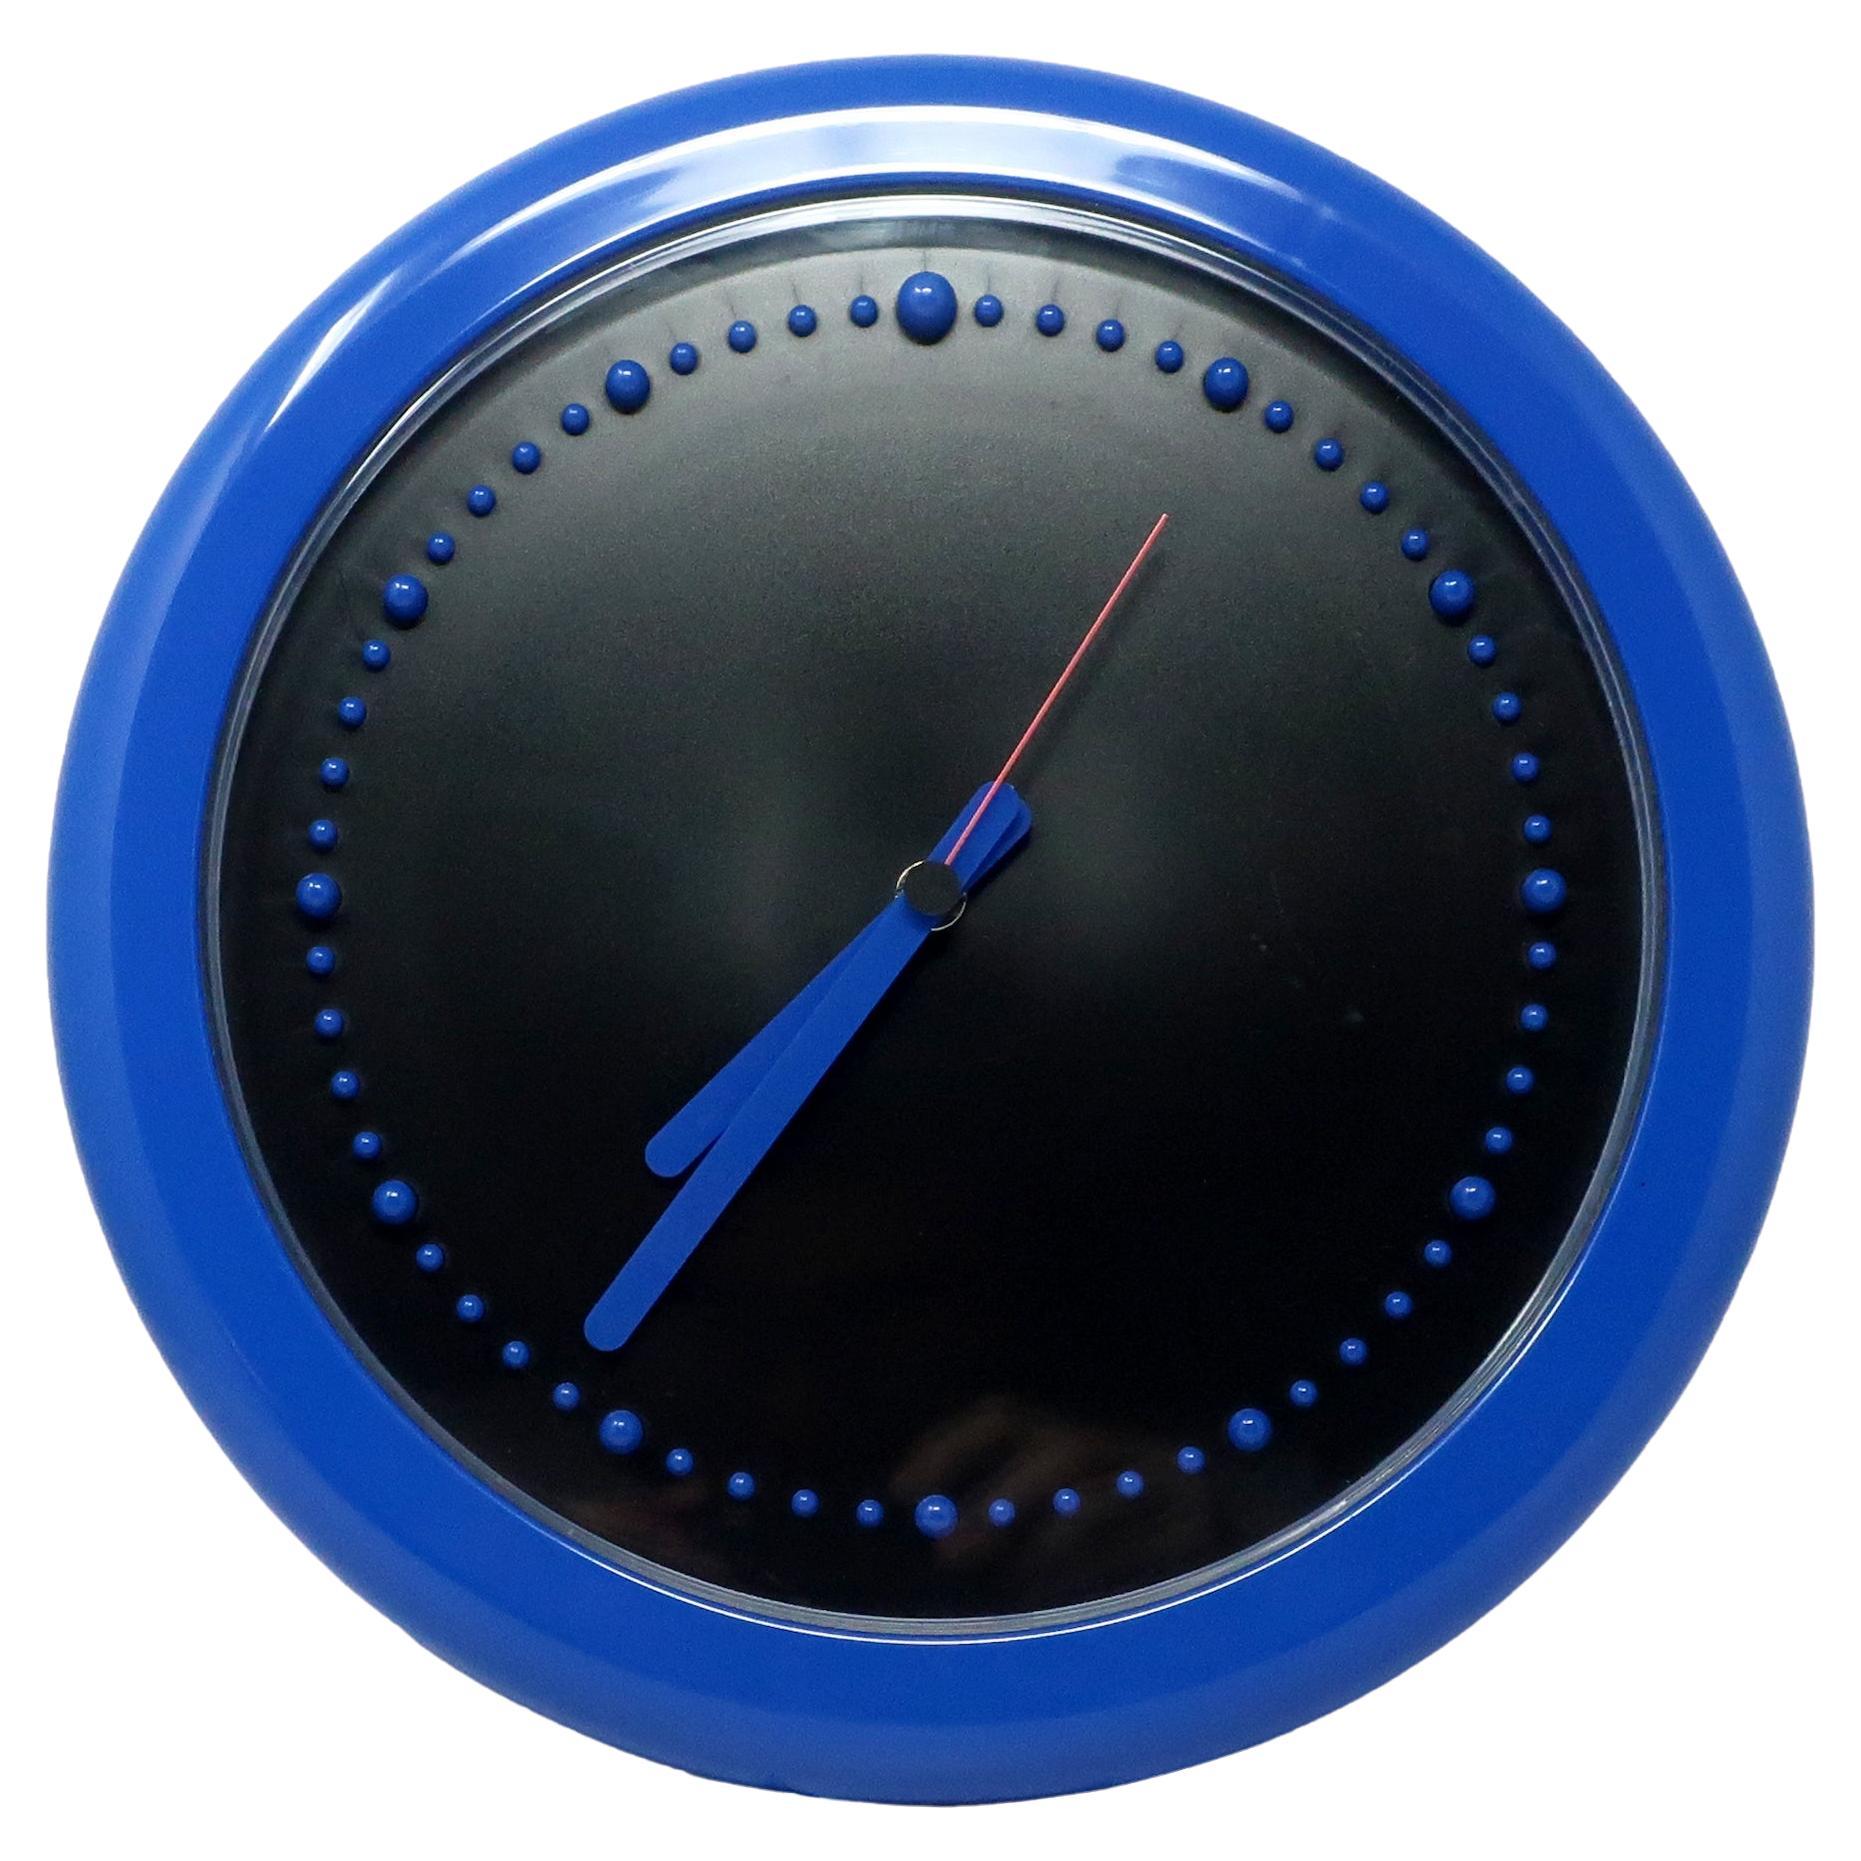 1980s Postmodern Black and Blue Rexite Zero 980 Wall Clock For Sale